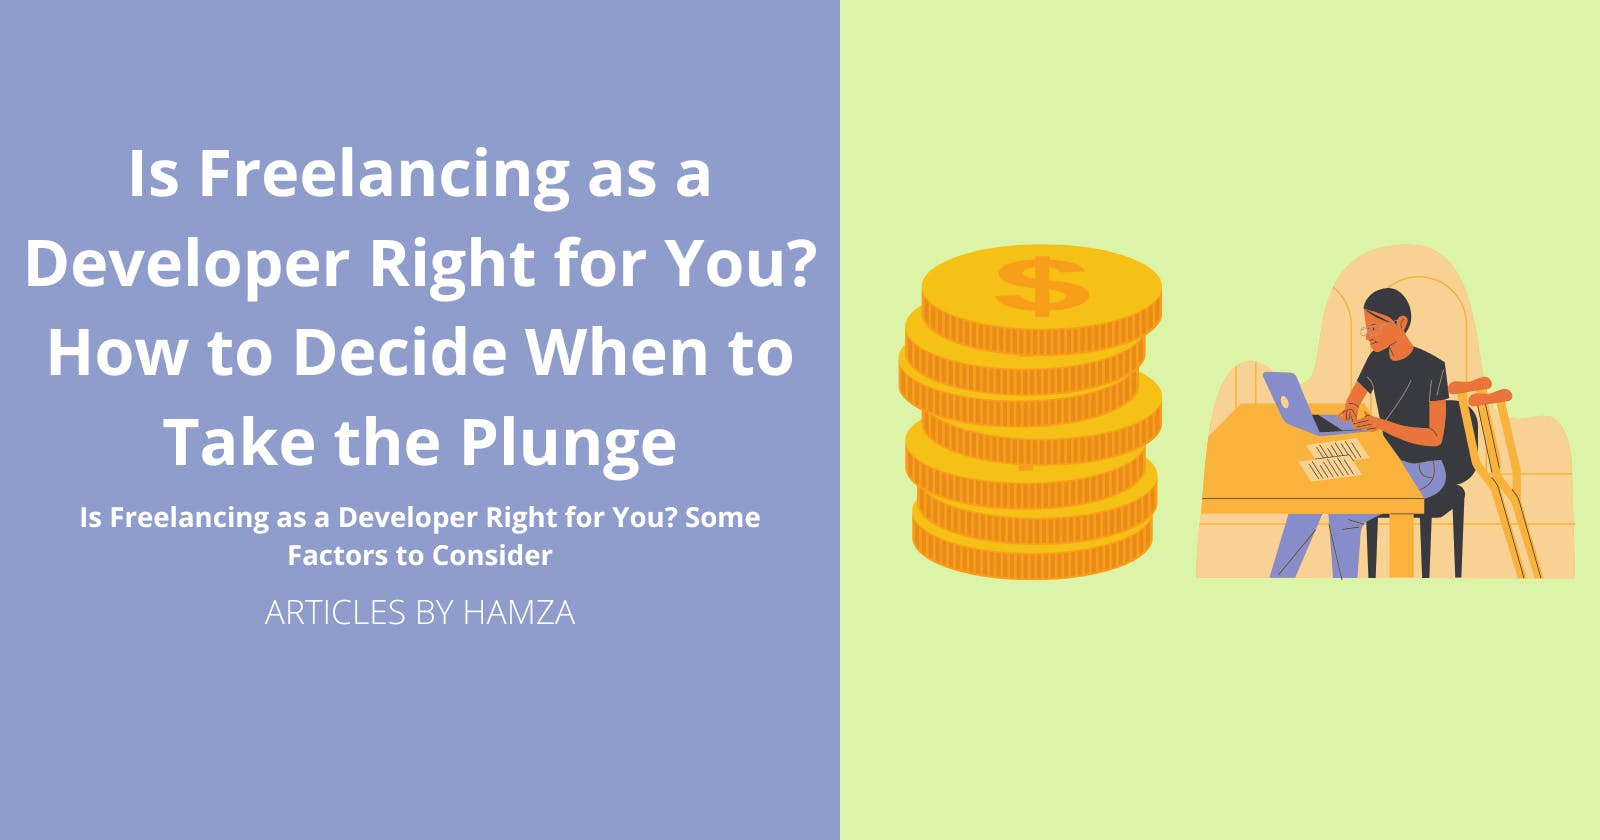 Is Freelancing as a Developer Right for You? How to Decide When to Take the Plunge